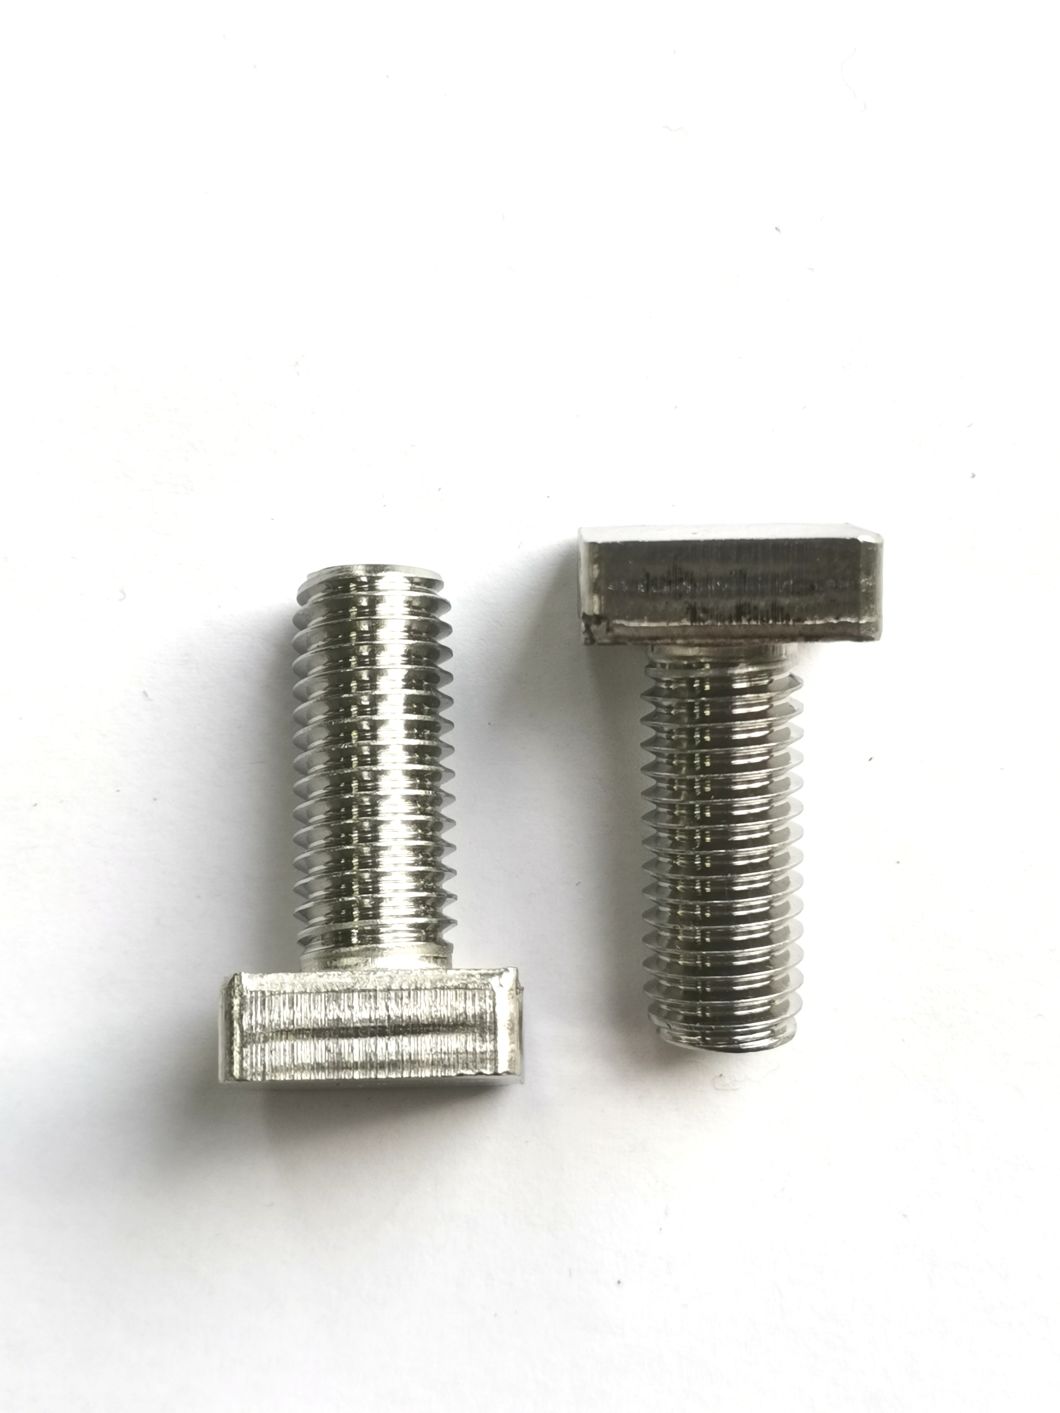 Fastener/Bolt/Square Bolt/Tap Bolts/Metric Thread/Square Head/Stainless Steel/Carbon Steel/Zinc Plated